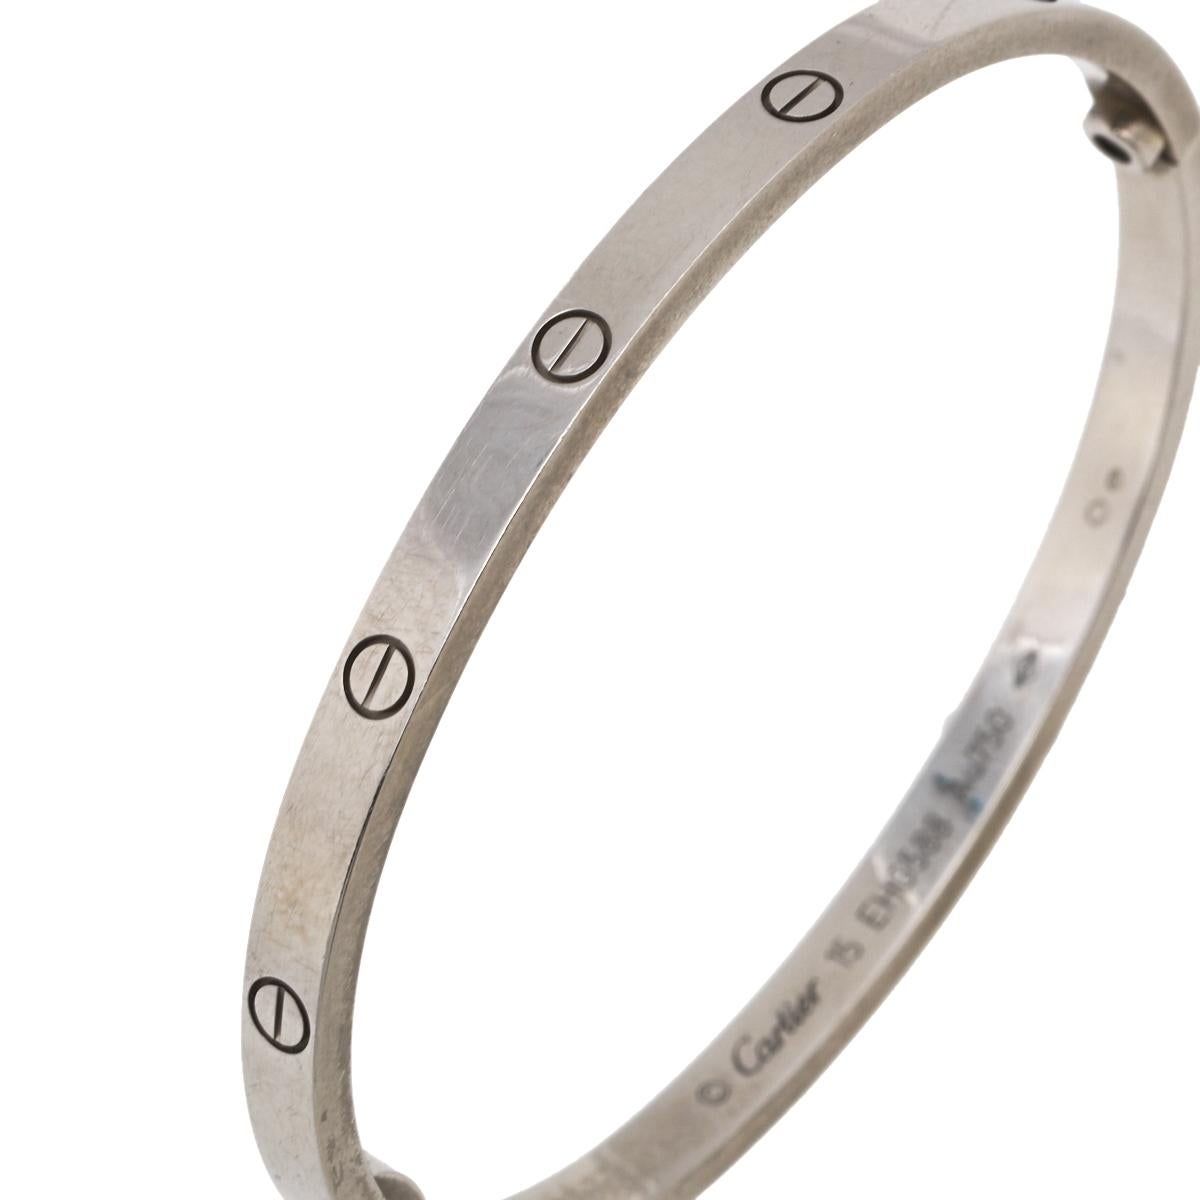 We fell in love with this Cartier Love bracelet at first glance. Look at its gorgeous yet subtle accents and picture how it will beautifully sit on your wrist and charm your peers. The creation is crafted from 18k white gold and neatly detailed with